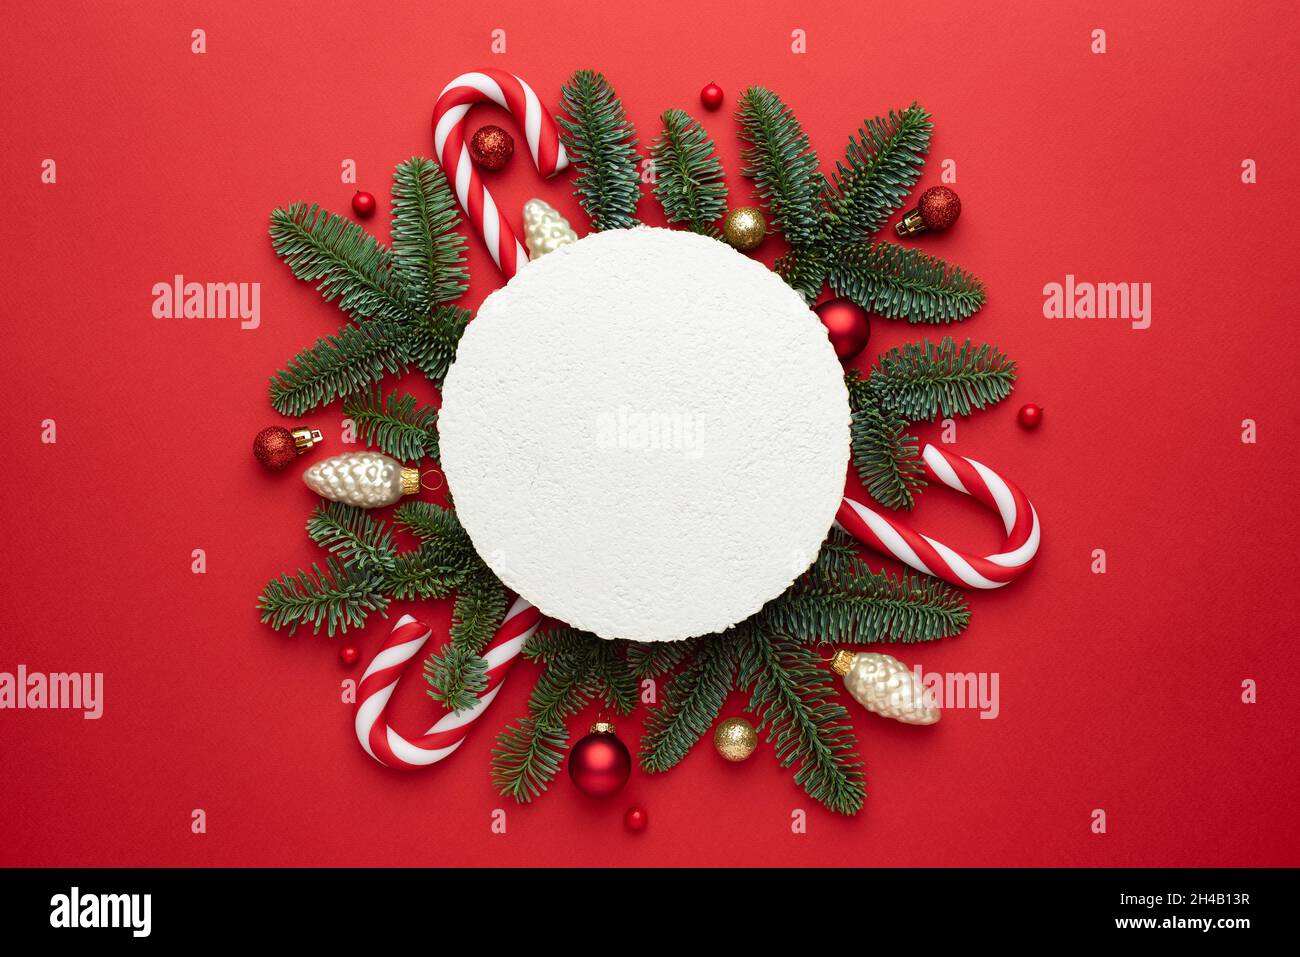 Festive Christmas background with a frame made of decorated fir branches and sleigh bells Stock Photo